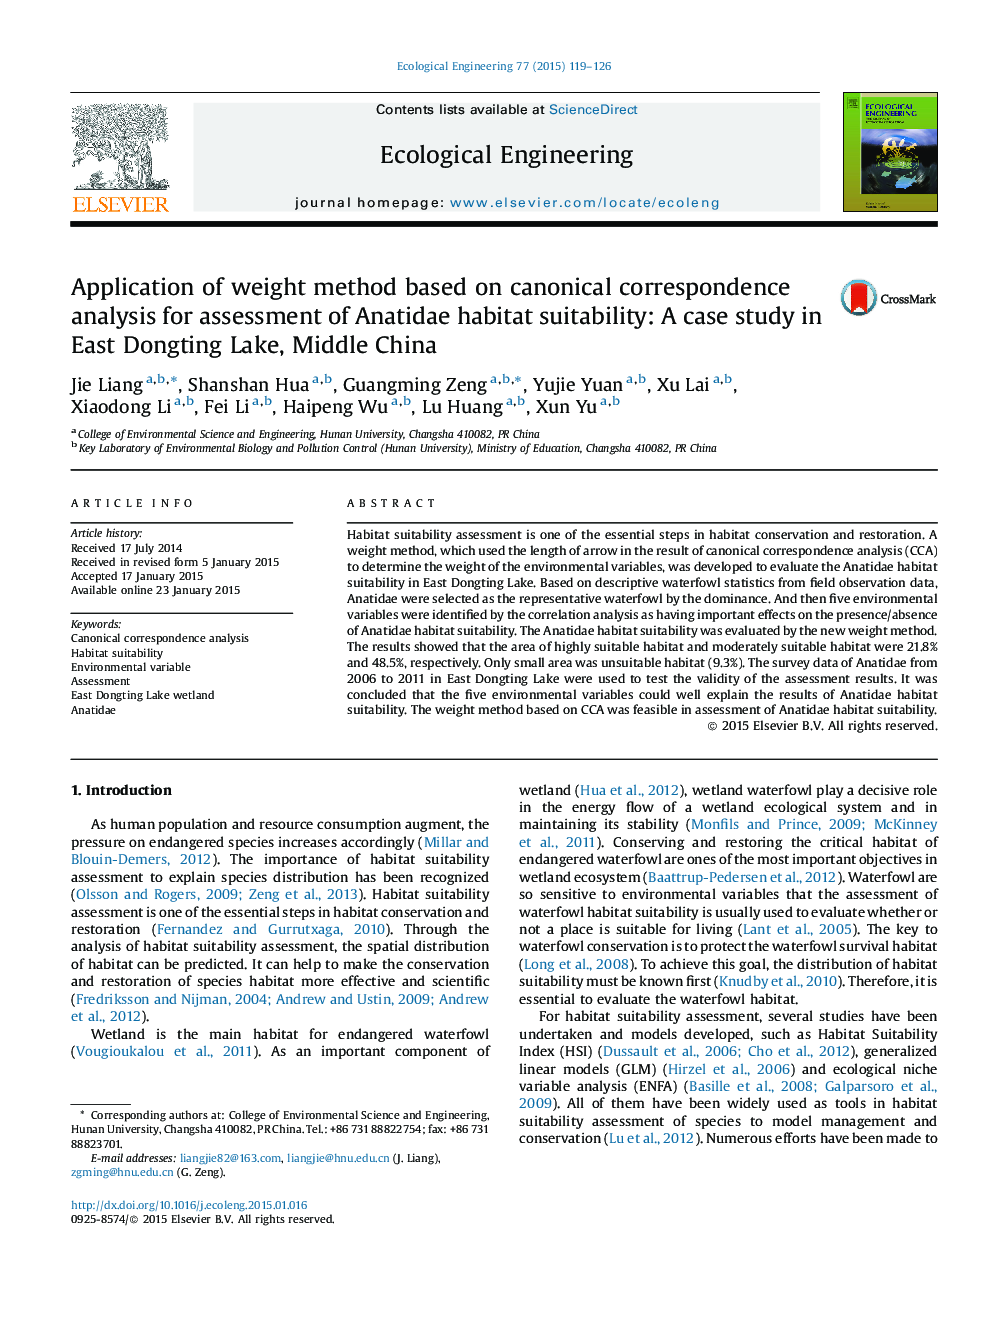 Application of weight method based on canonical correspondence analysis for assessment of Anatidae habitat suitability: A case study in East Dongting Lake, Middle China